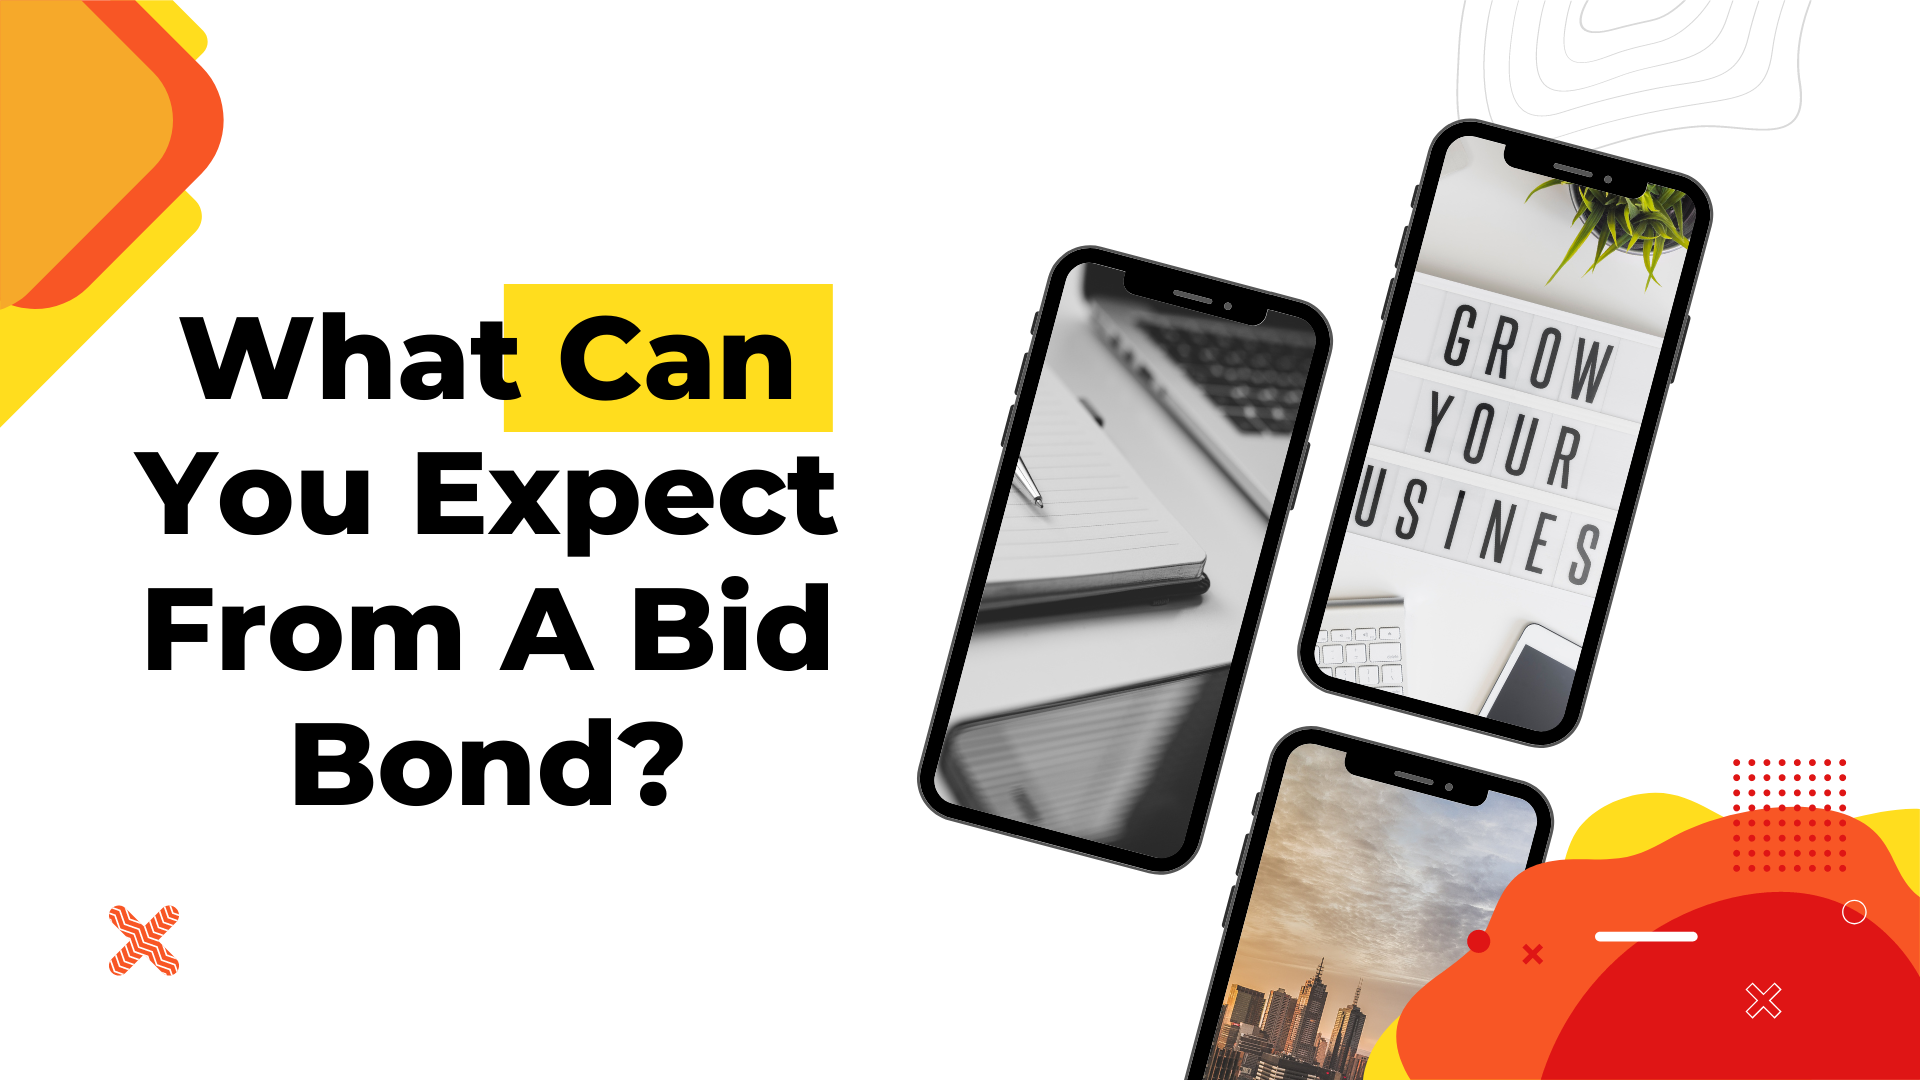 bid bond - What can you expect from a bid bond - cellphones